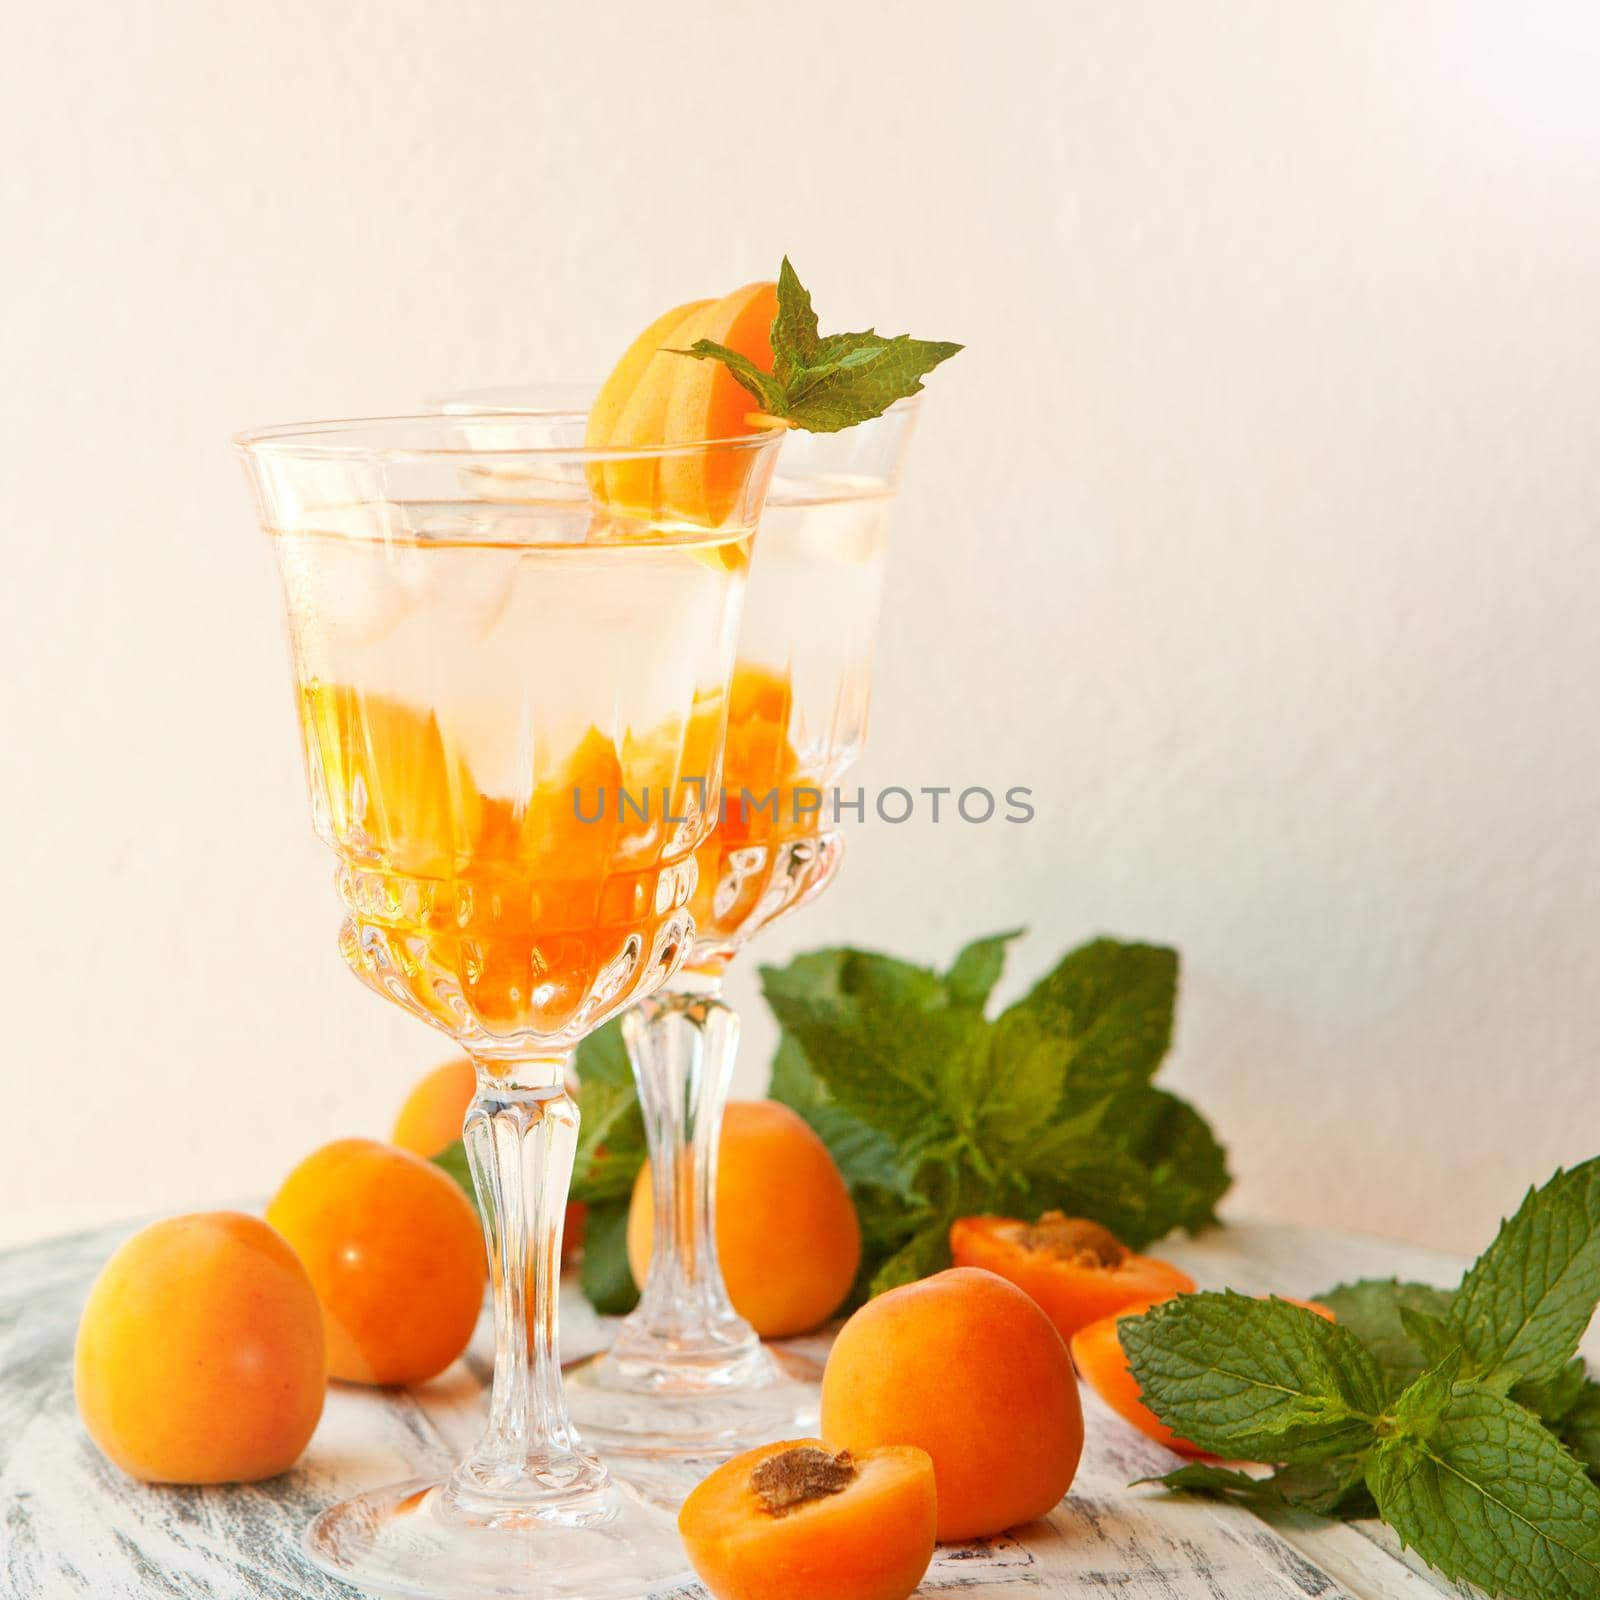 Summer drink- apricot cocktail with ice in glasses. Refreshing summer homemade alcoholic or non-alcoholic cocktails or Detox infused flavored water